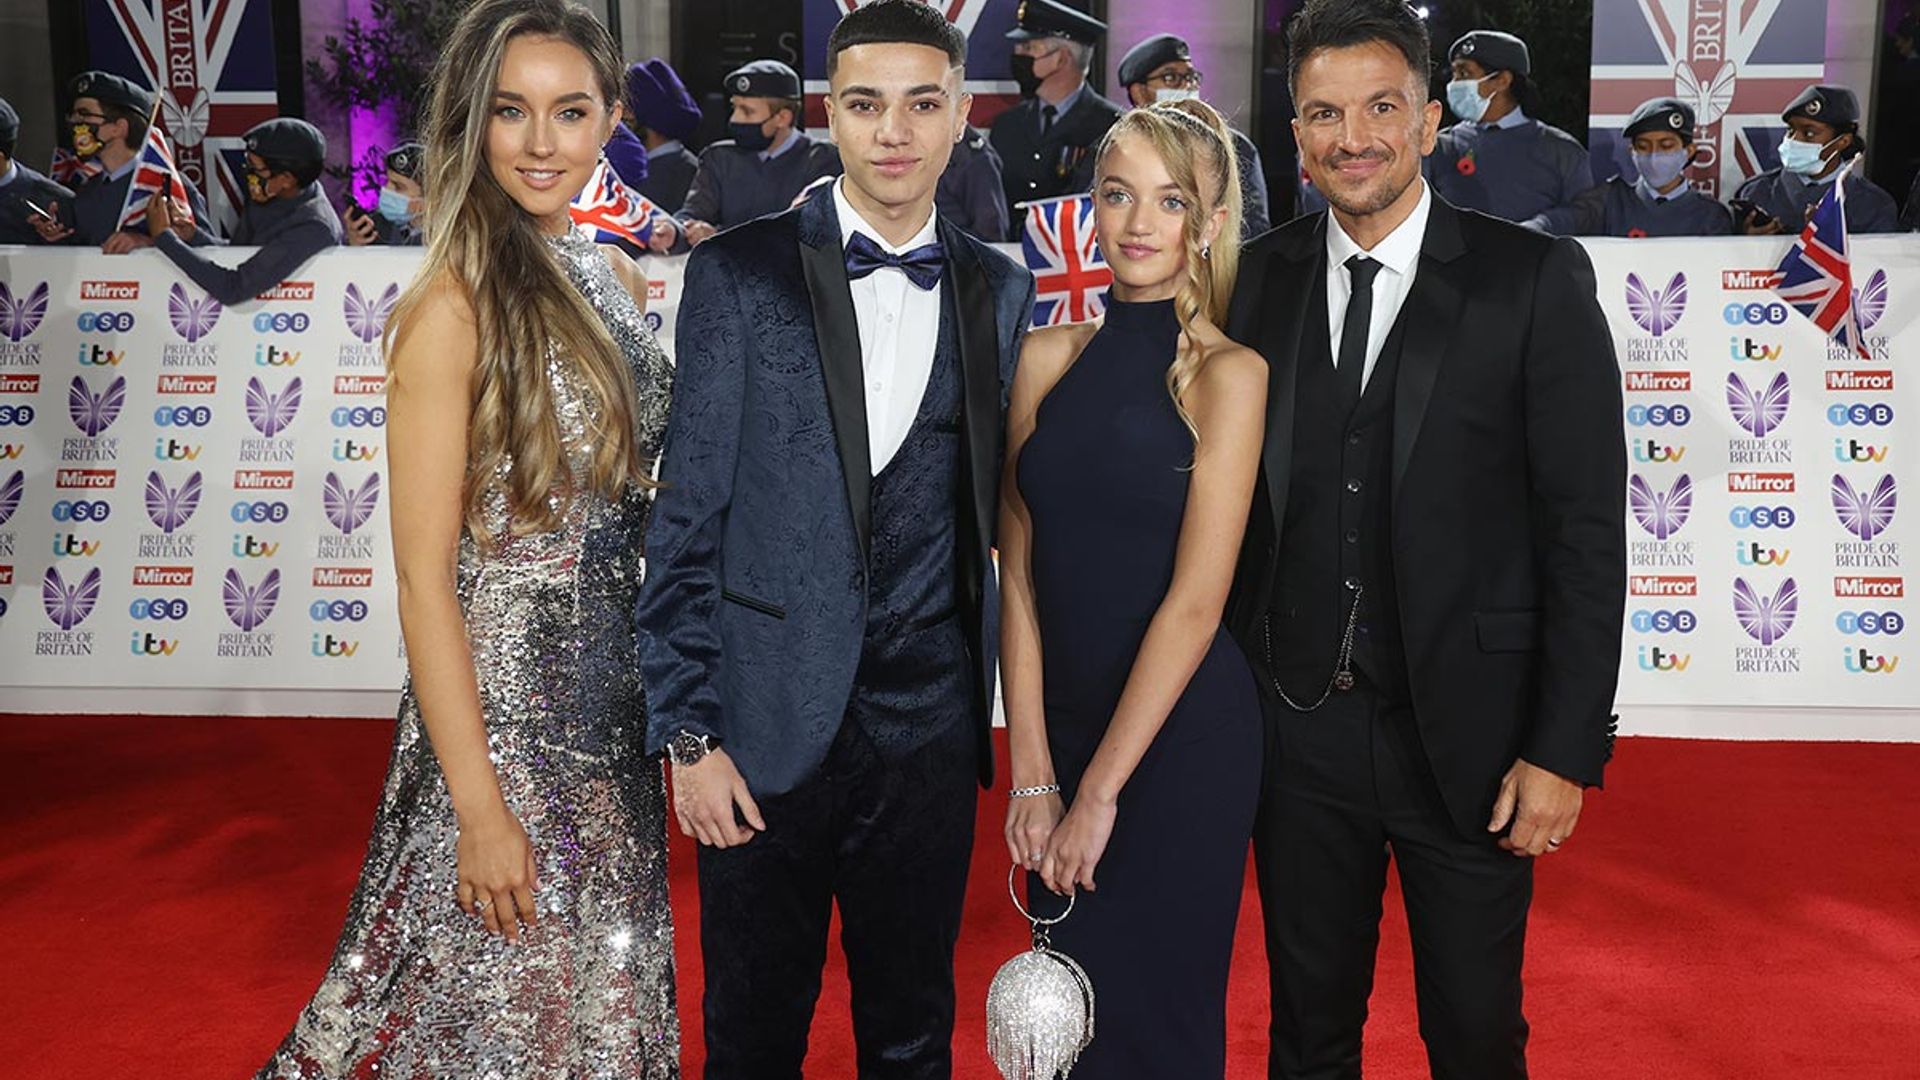 Peter Andre’s daughter Princess shares sweet photo with her brother – and his reaction is the best